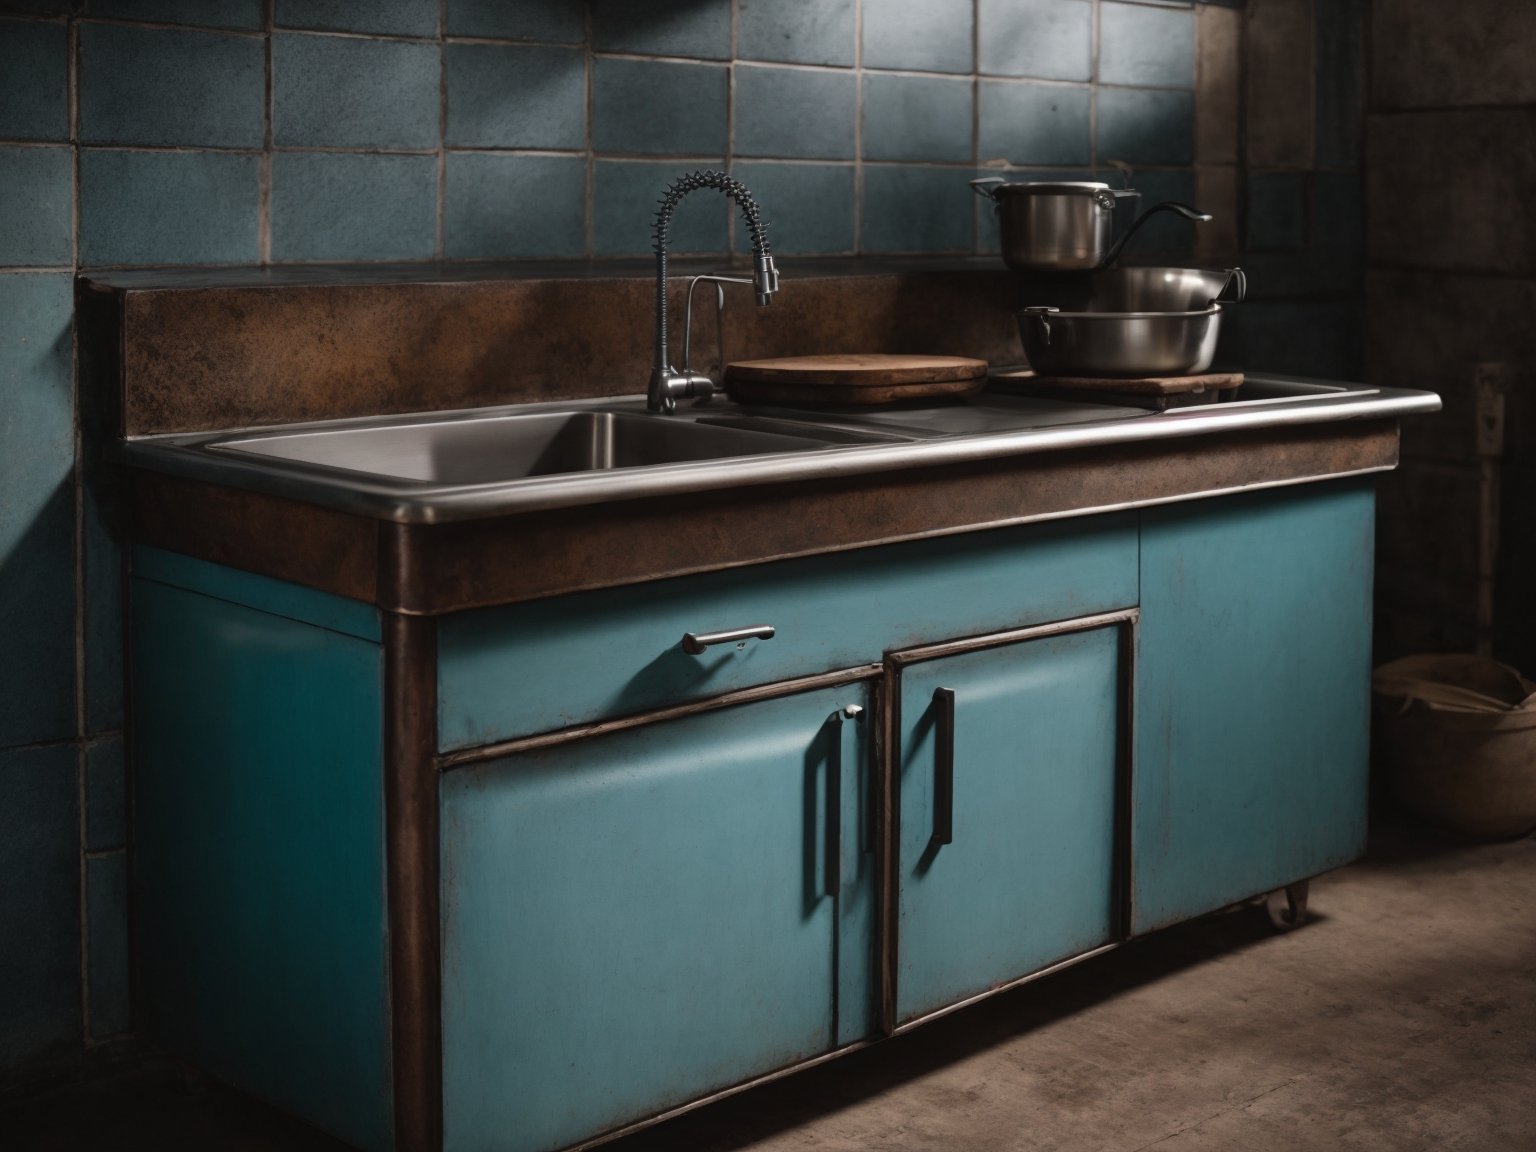 A metal kitchen sink cabinet with a vintage flair, perfect for adding a touch of nostalgia to your home.